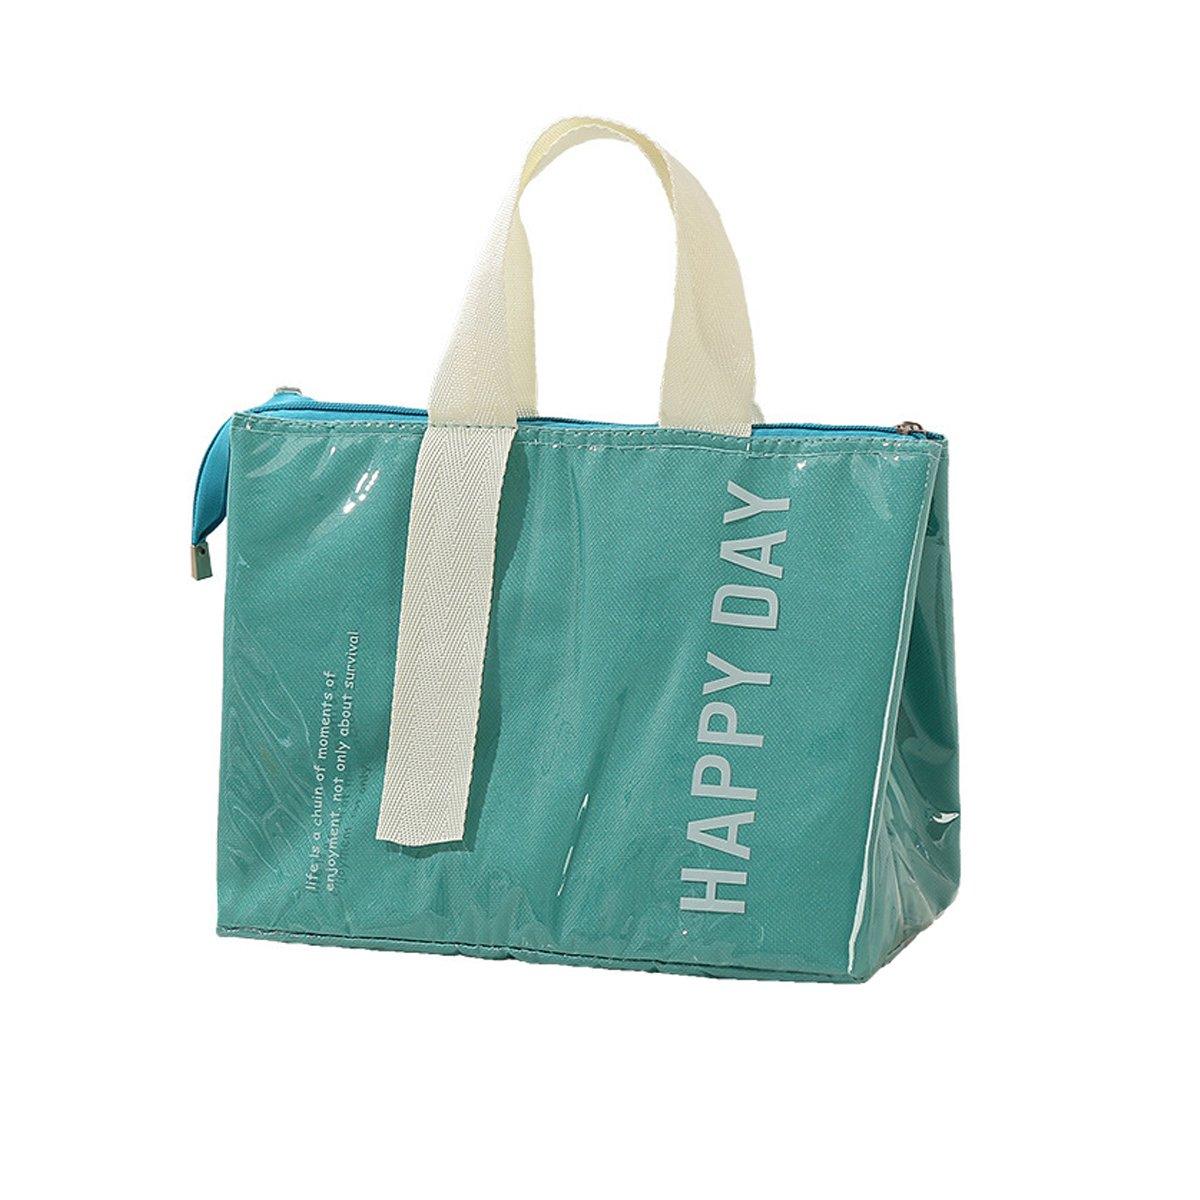 Large Capacity Lunch Bag 1PC 5Colours Thermal Insulated - Discount Packaging Warehouse